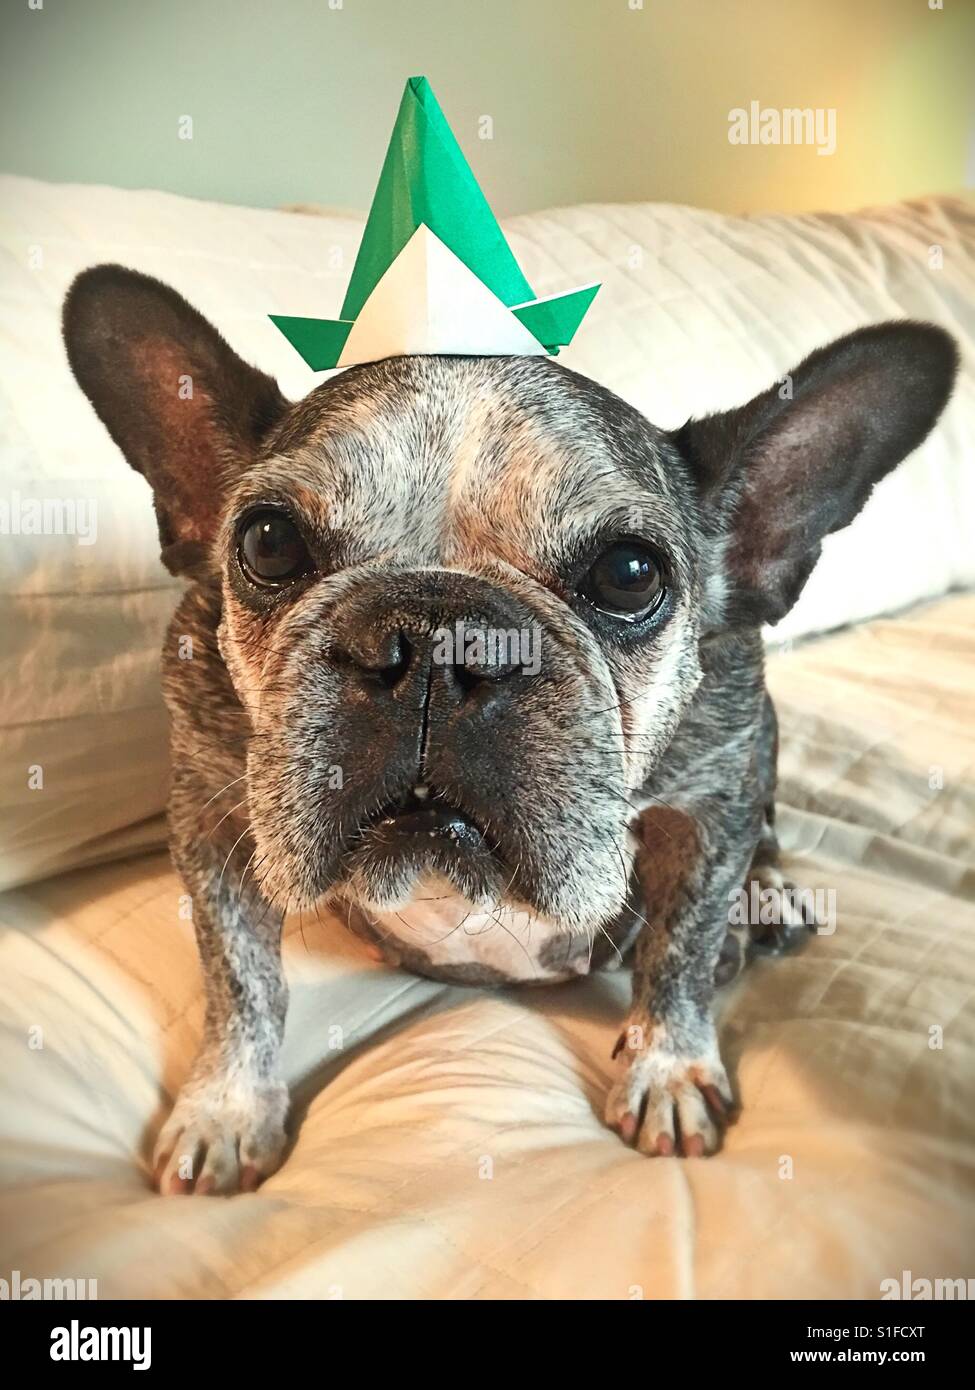 An old french bulldog wearing an origami hat. Stock Photo